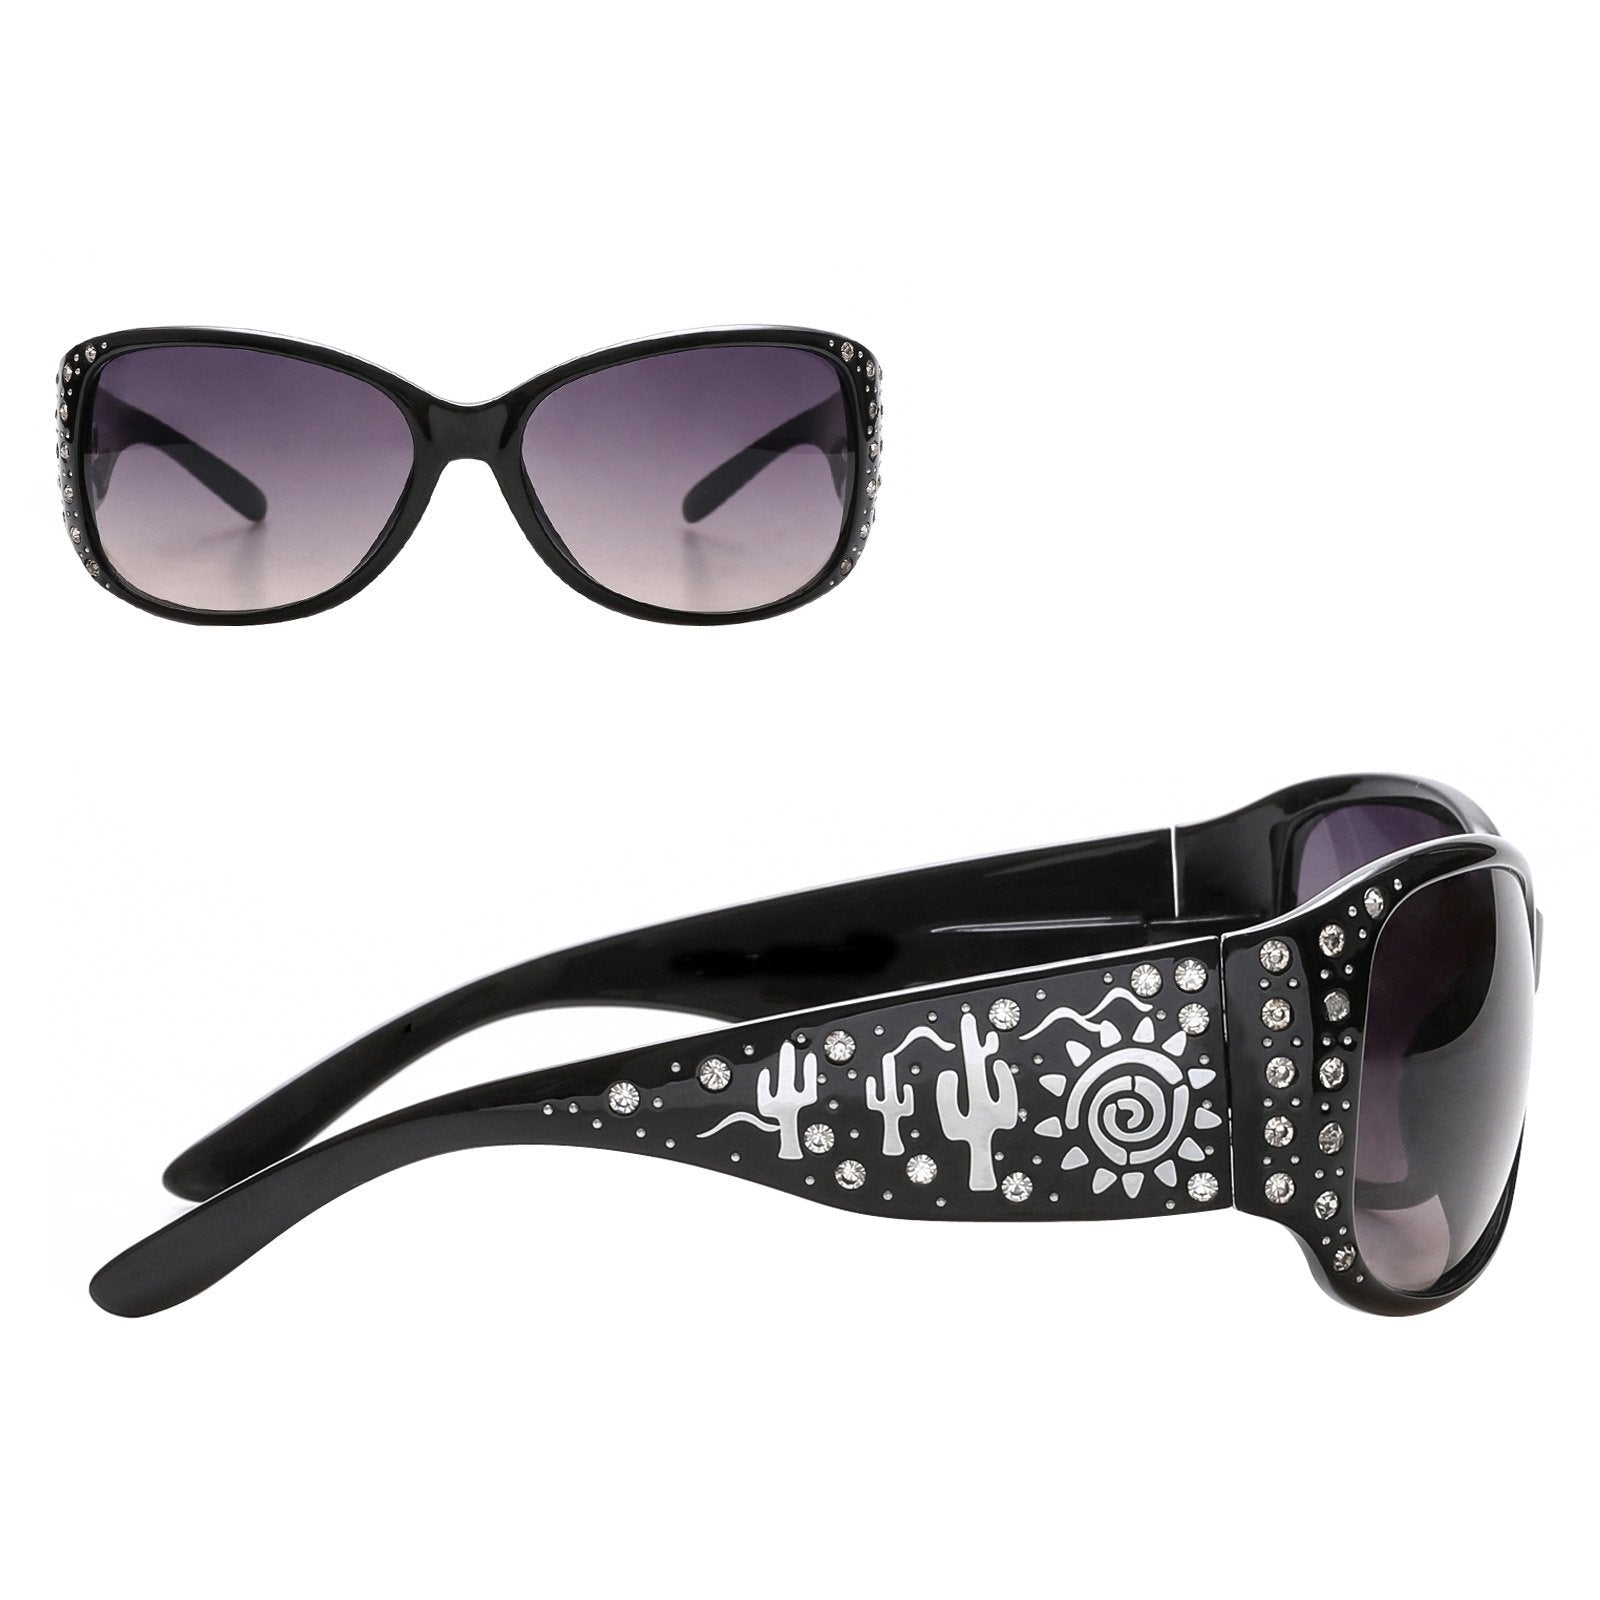 Montana West Cactus Sunglasses UV400 Protection For Women - Cowgirl Wear